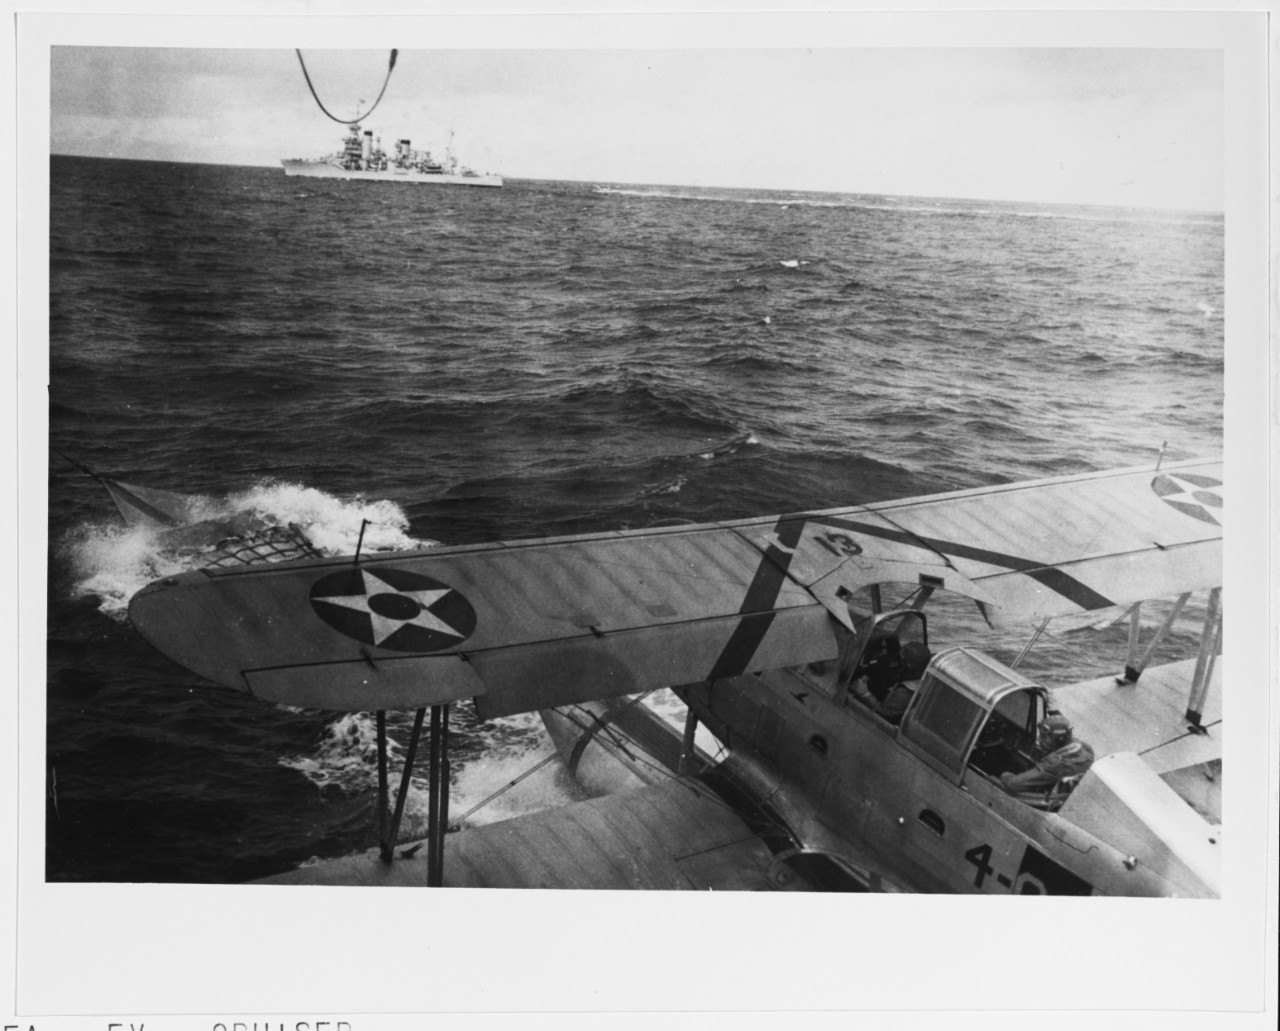 Photo #: NH 93166  Curtiss SOC scout observation floatplane